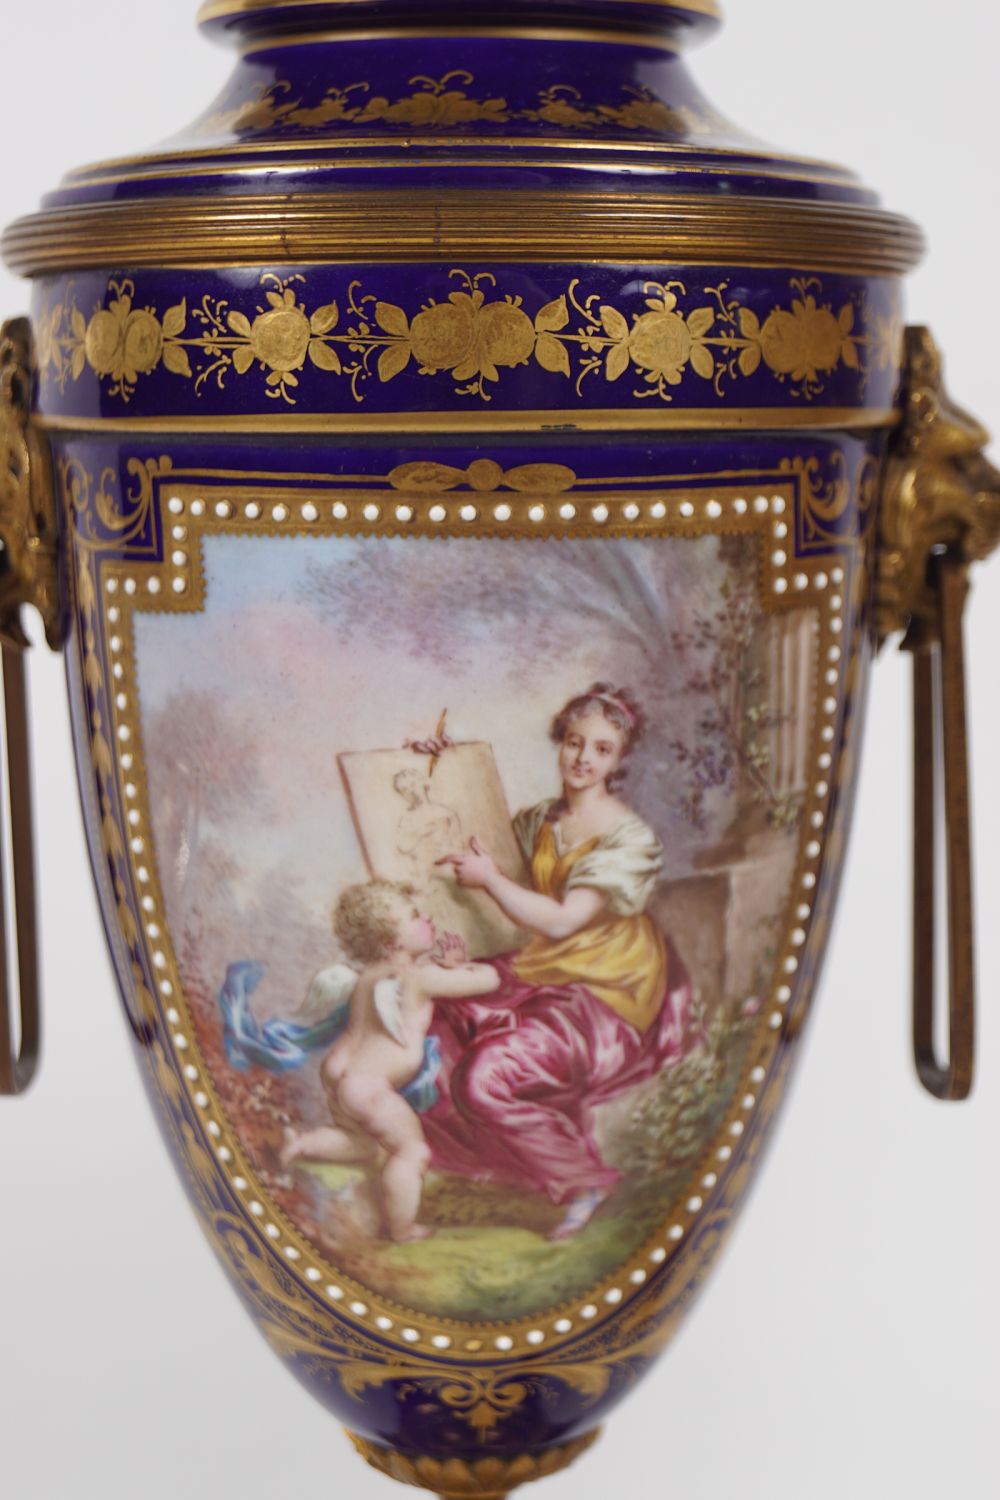 PAIR OF 19TH-CENTURY SÈVRES CANDLE URNS - Image 4 of 8